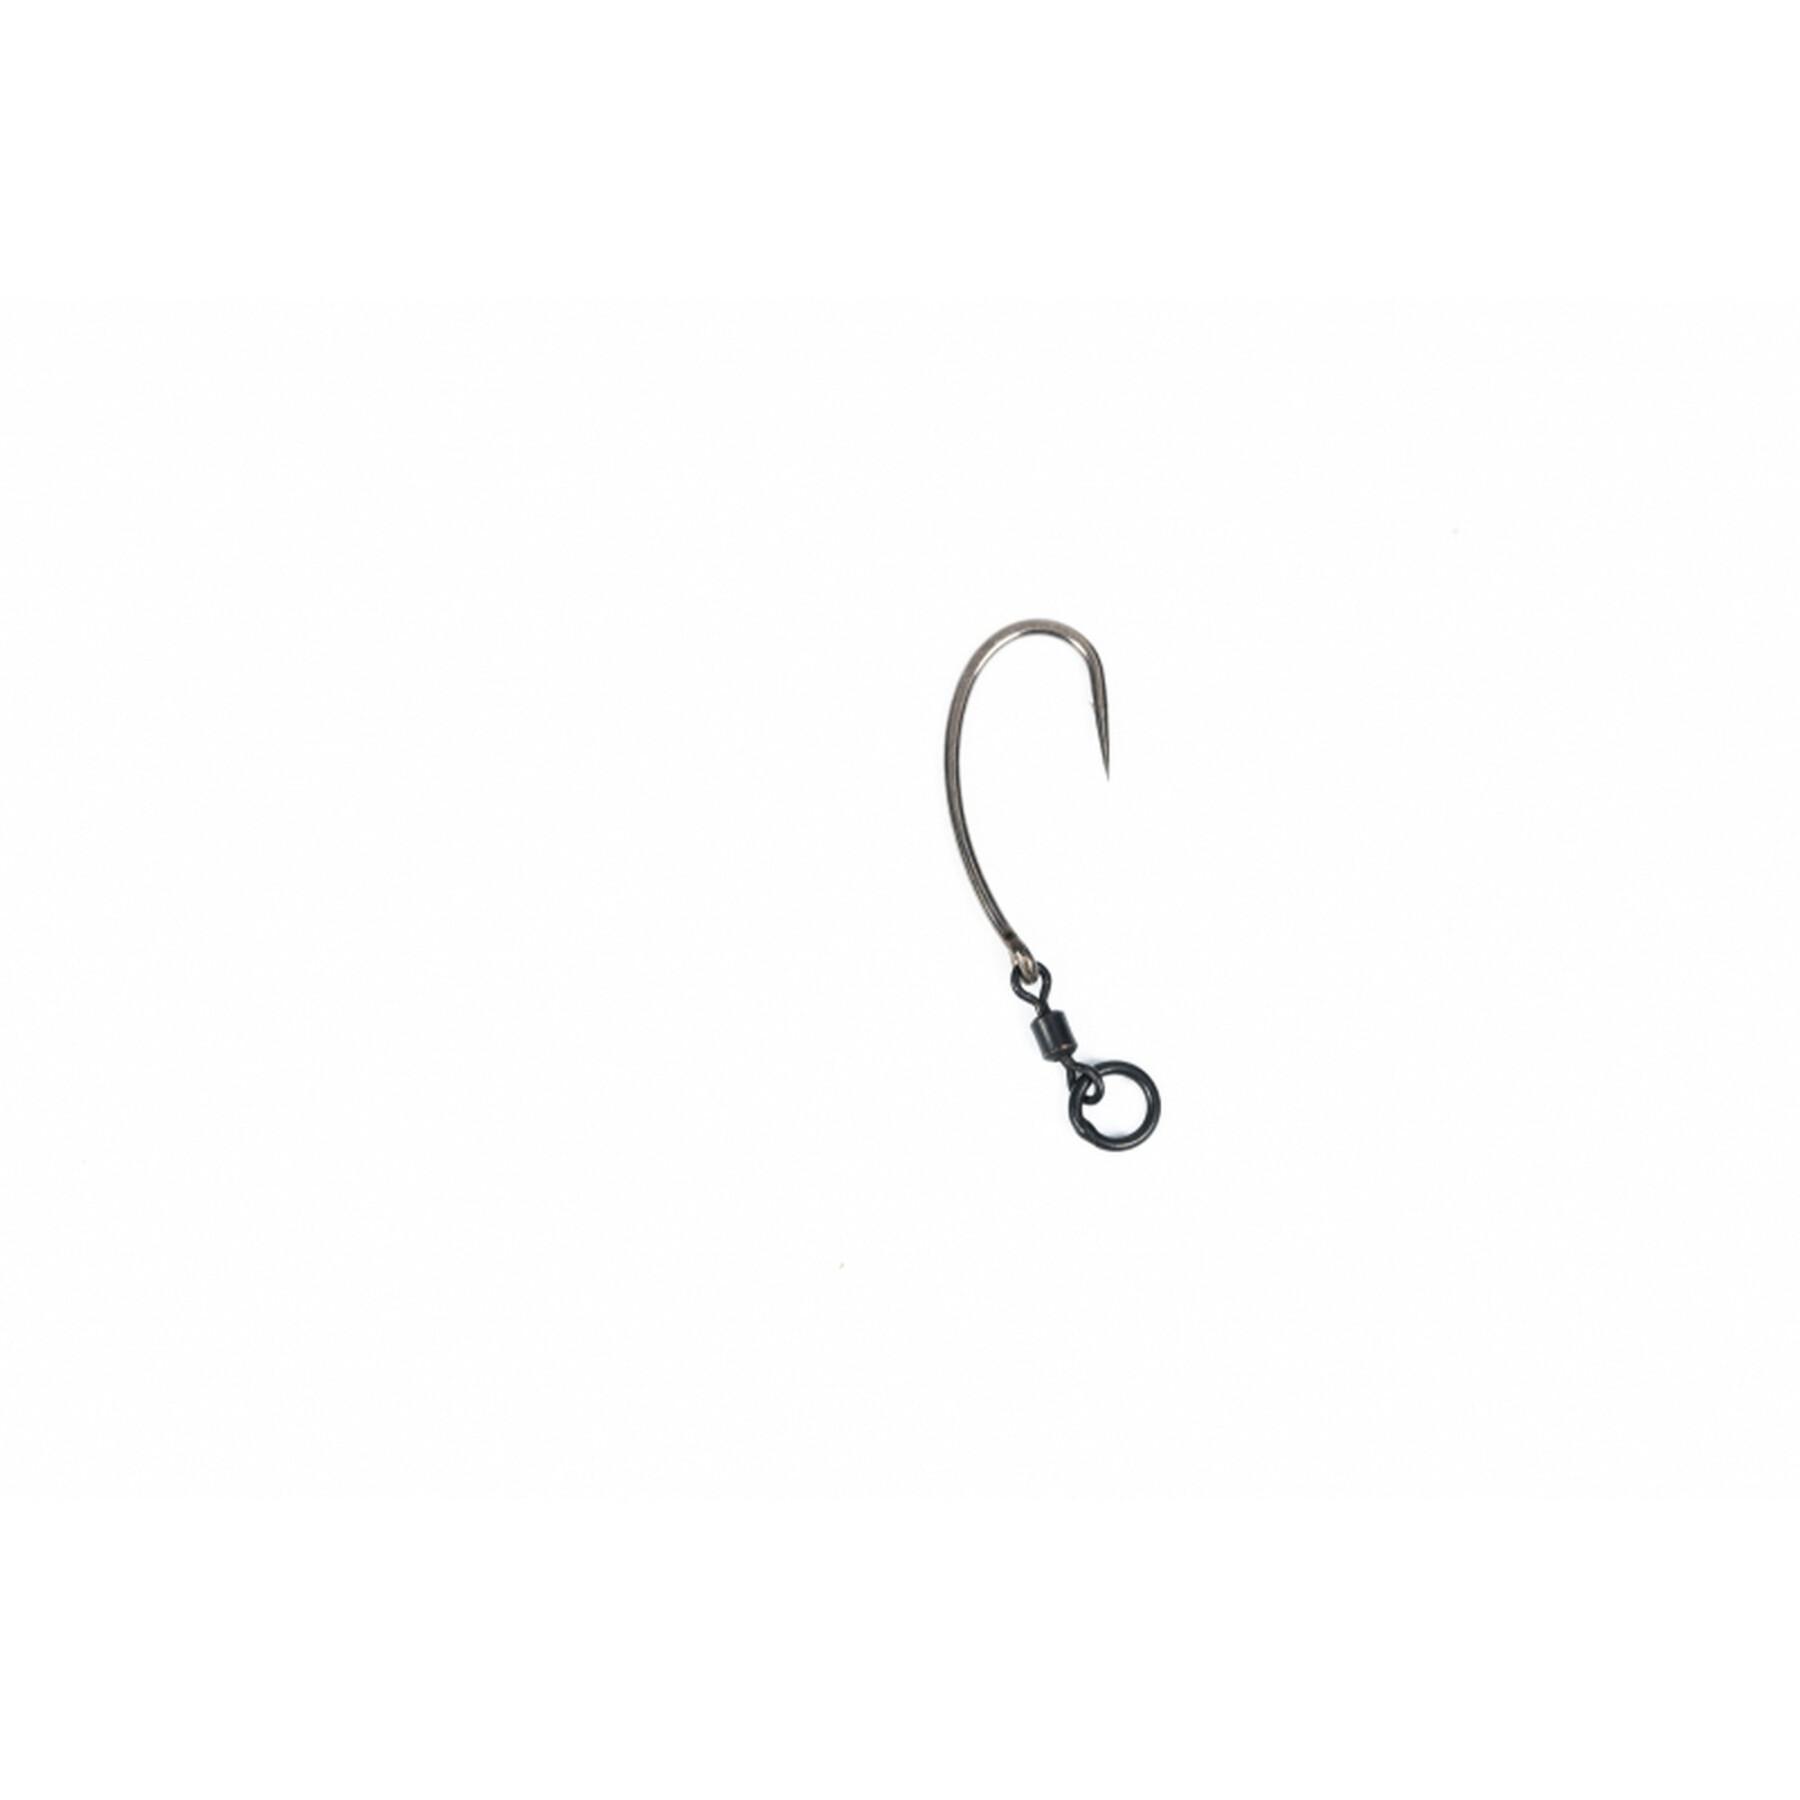 Hak Pinpoint Fang Gyro taille 6 Micro Barbed